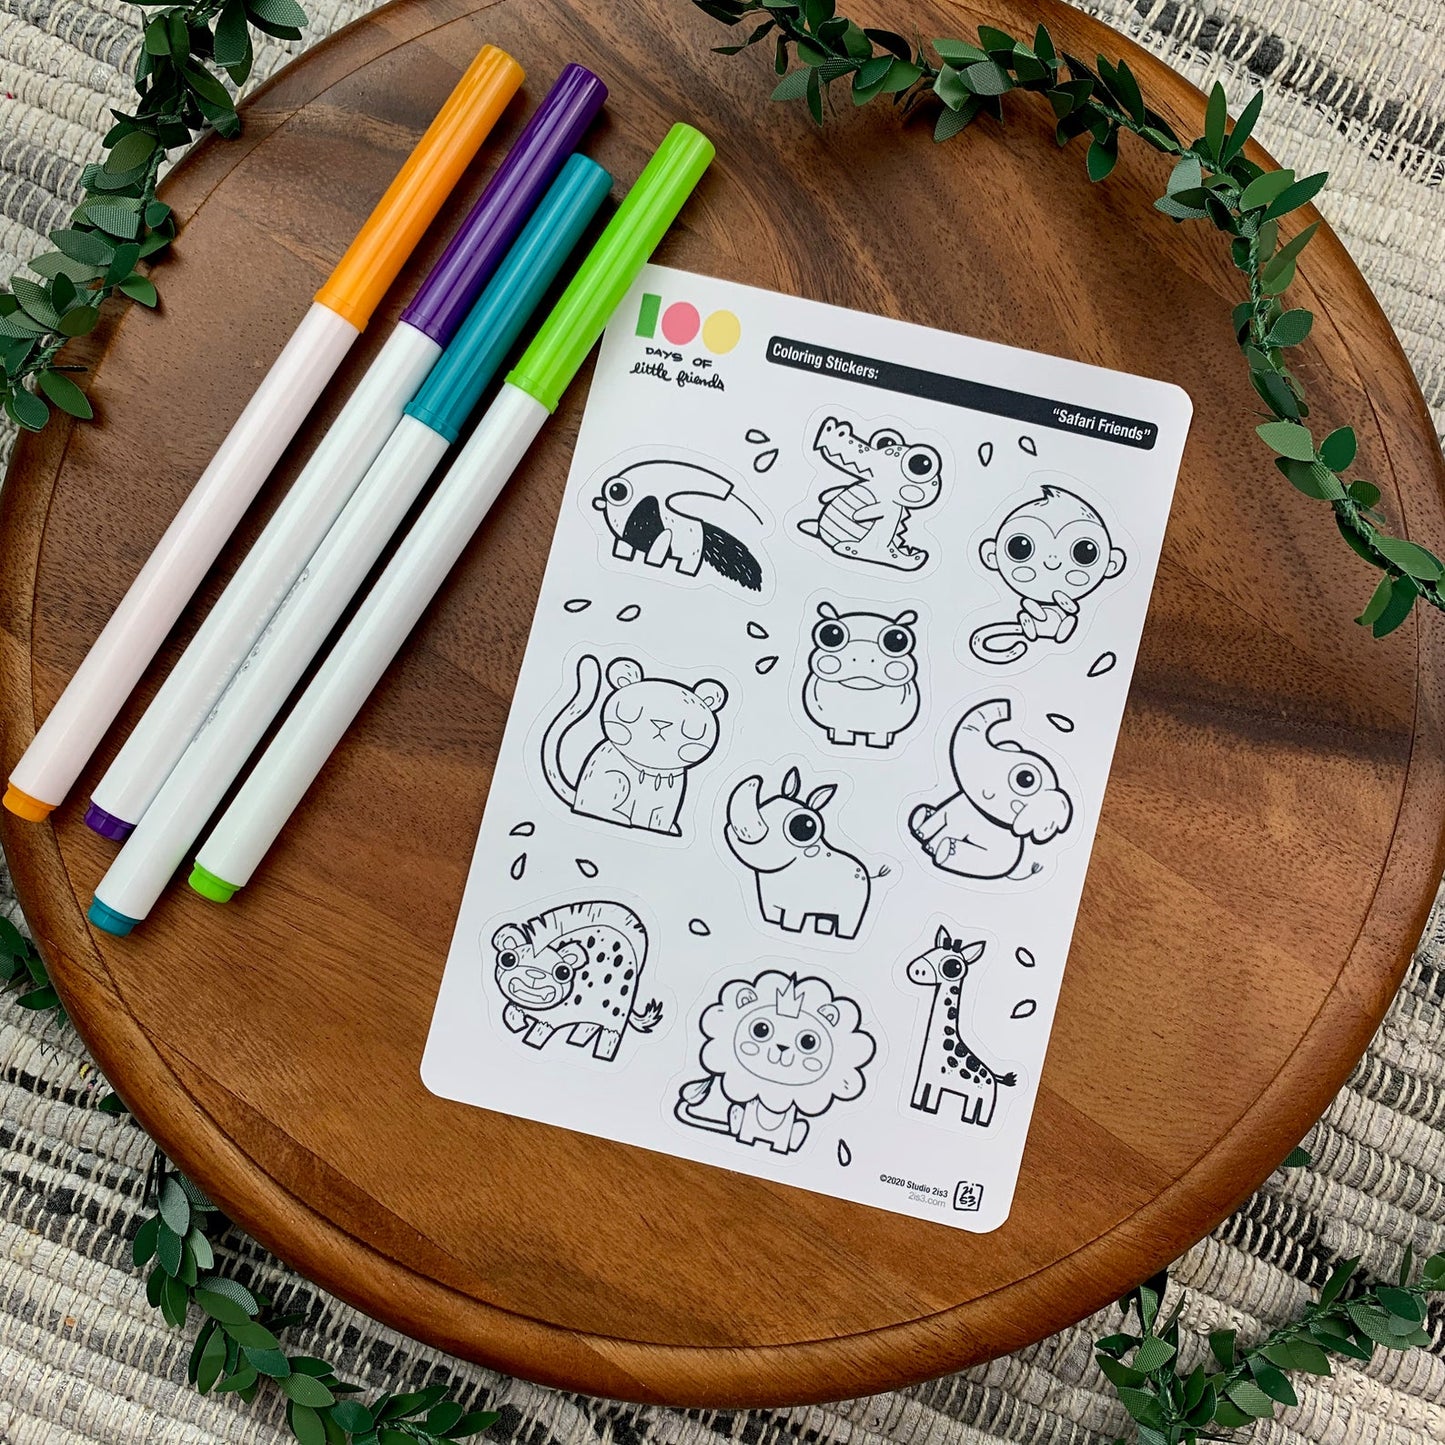 Markers and a sticker sheet with 10 little animal stickers on it. A Anteater, Alligator, Monkey, Hippo, Panther, Rhino, Elephant, Hyena, Lion, and Giraffe.